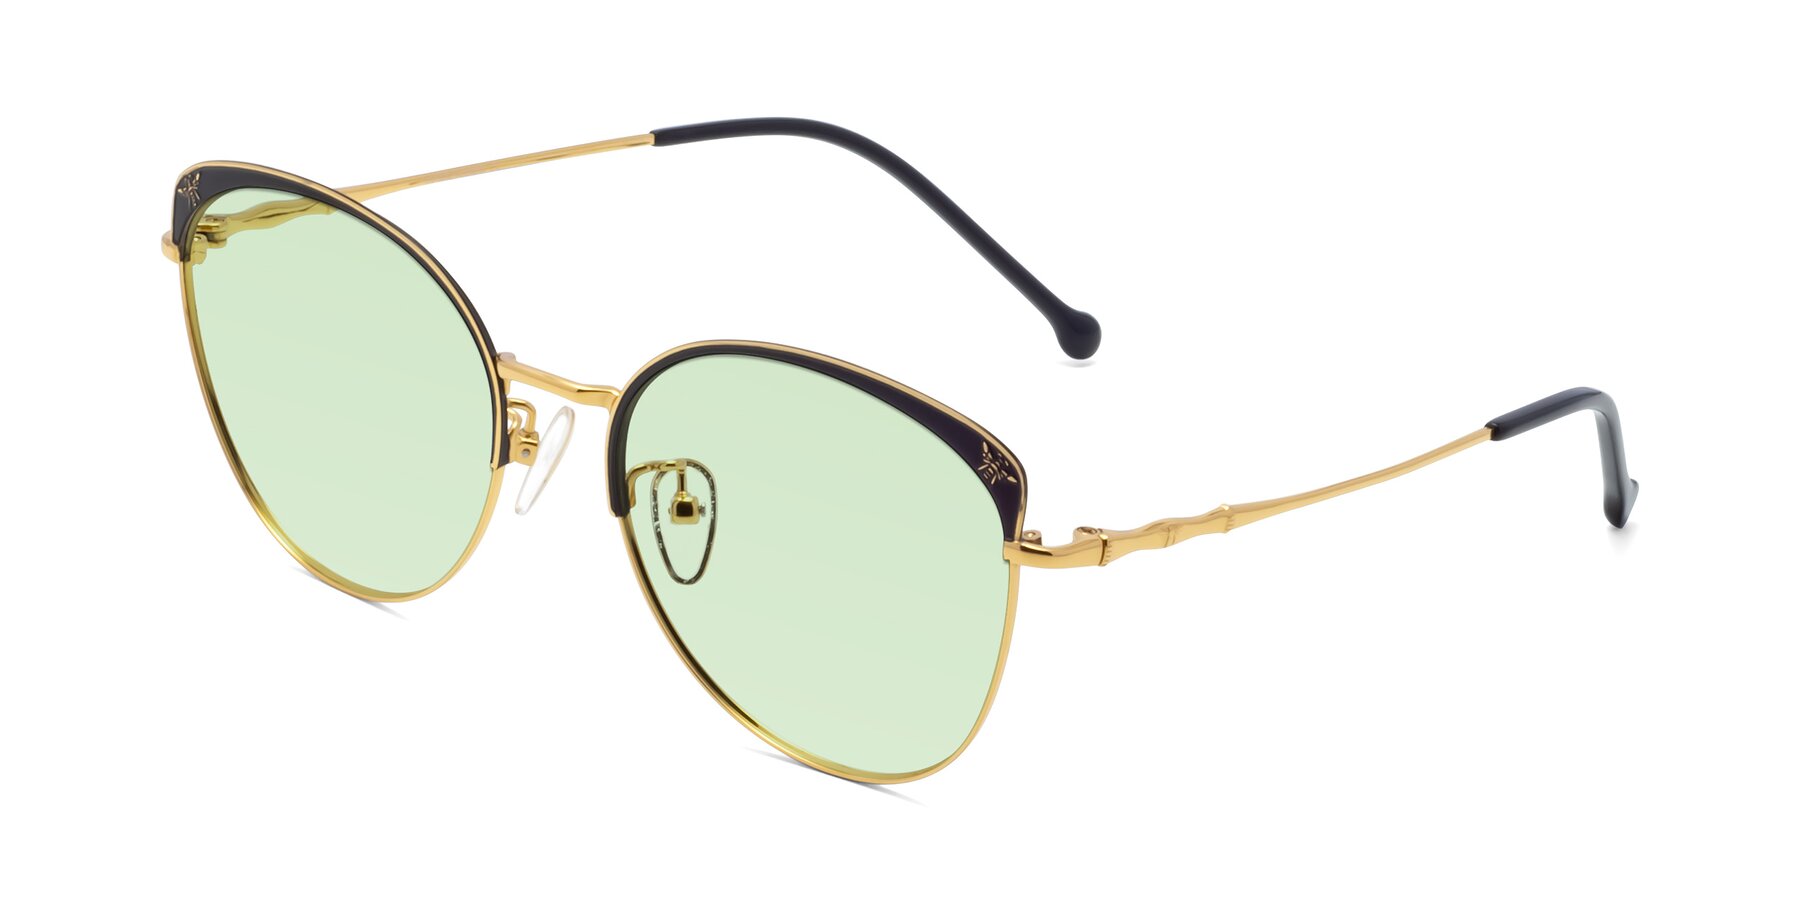 Angle of 18019 in Black-Gold with Light Green Tinted Lenses